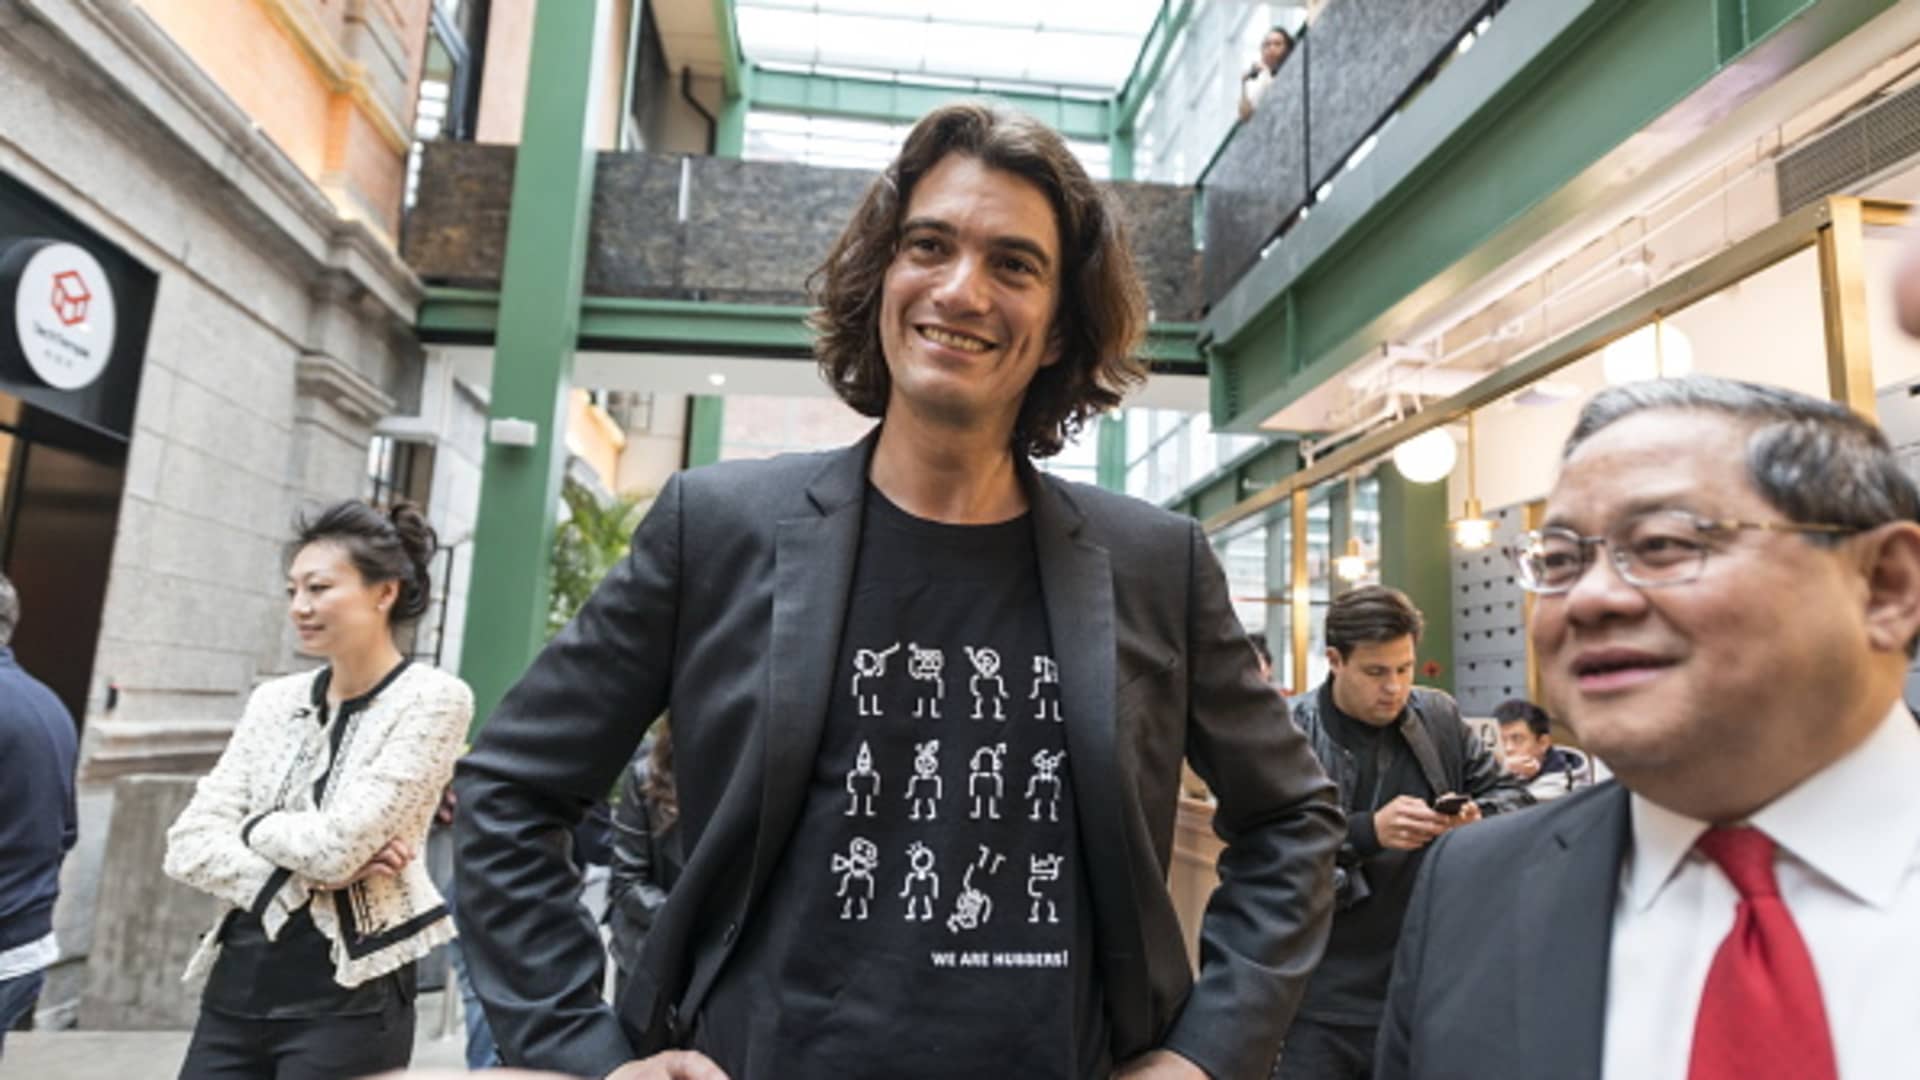 Adam Neumann makes a 0 million bid for WeWork, that could reach up to 0 million if financing and diligence firm up